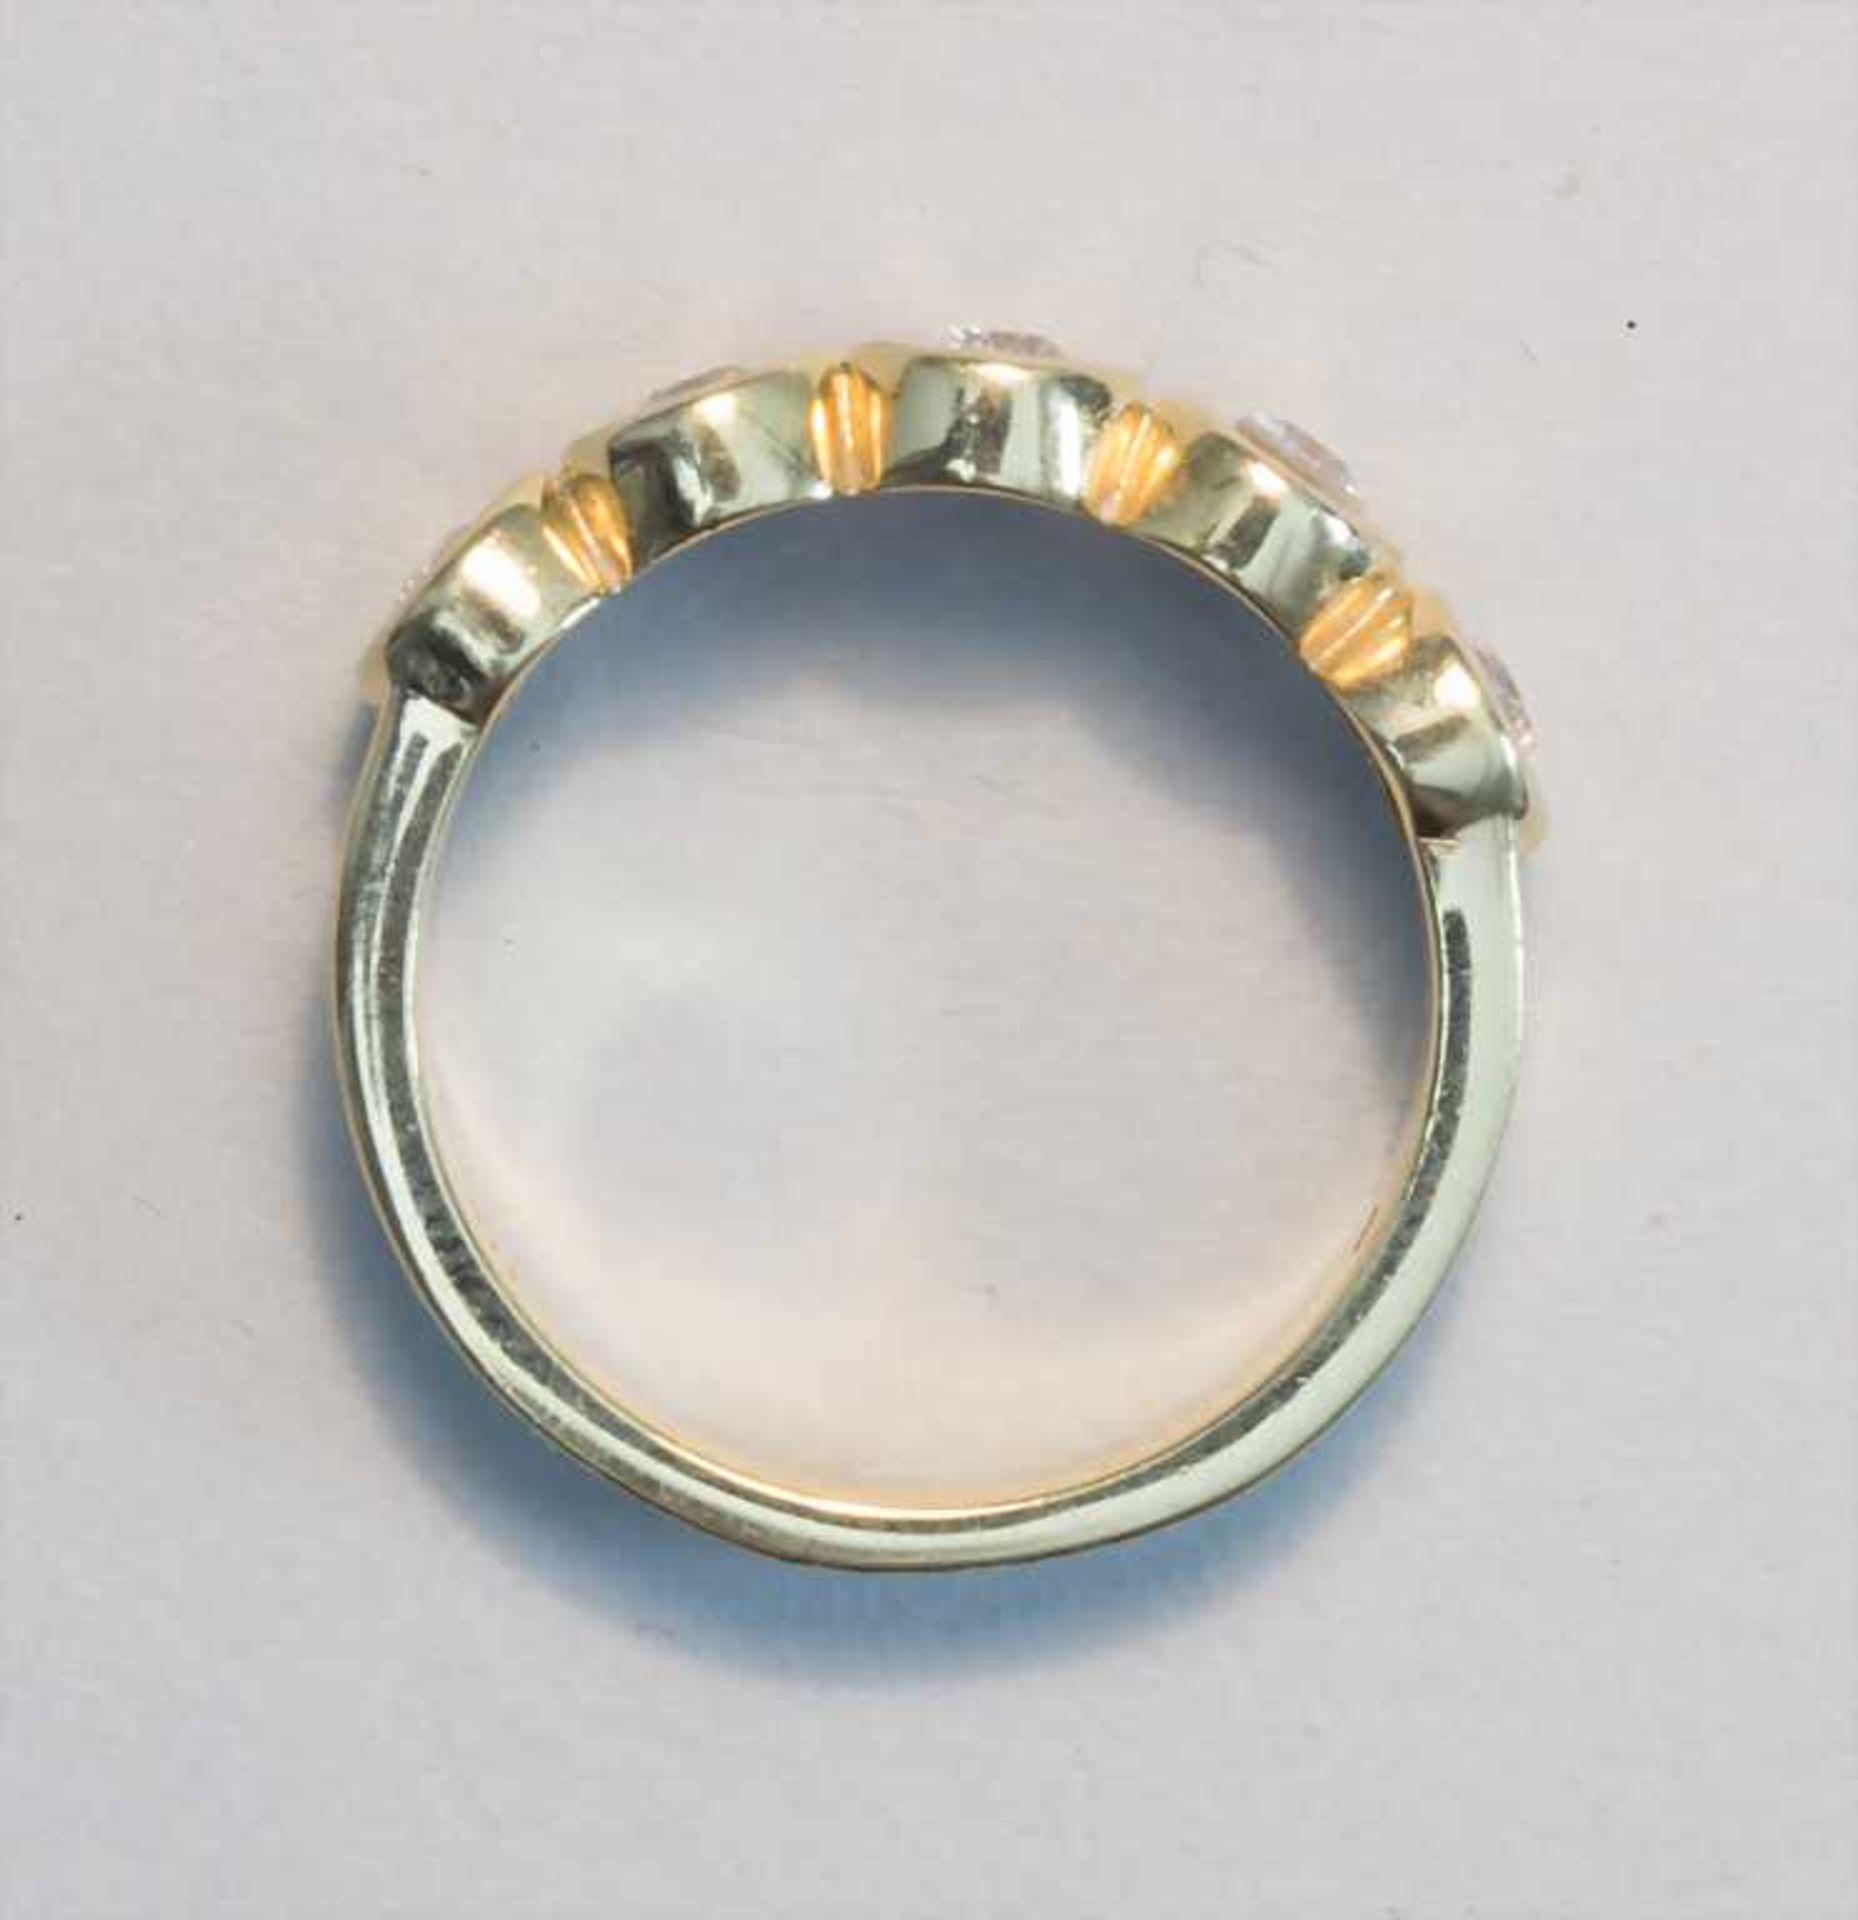 Damenring in Gold / A ladies gold ring - Image 4 of 4